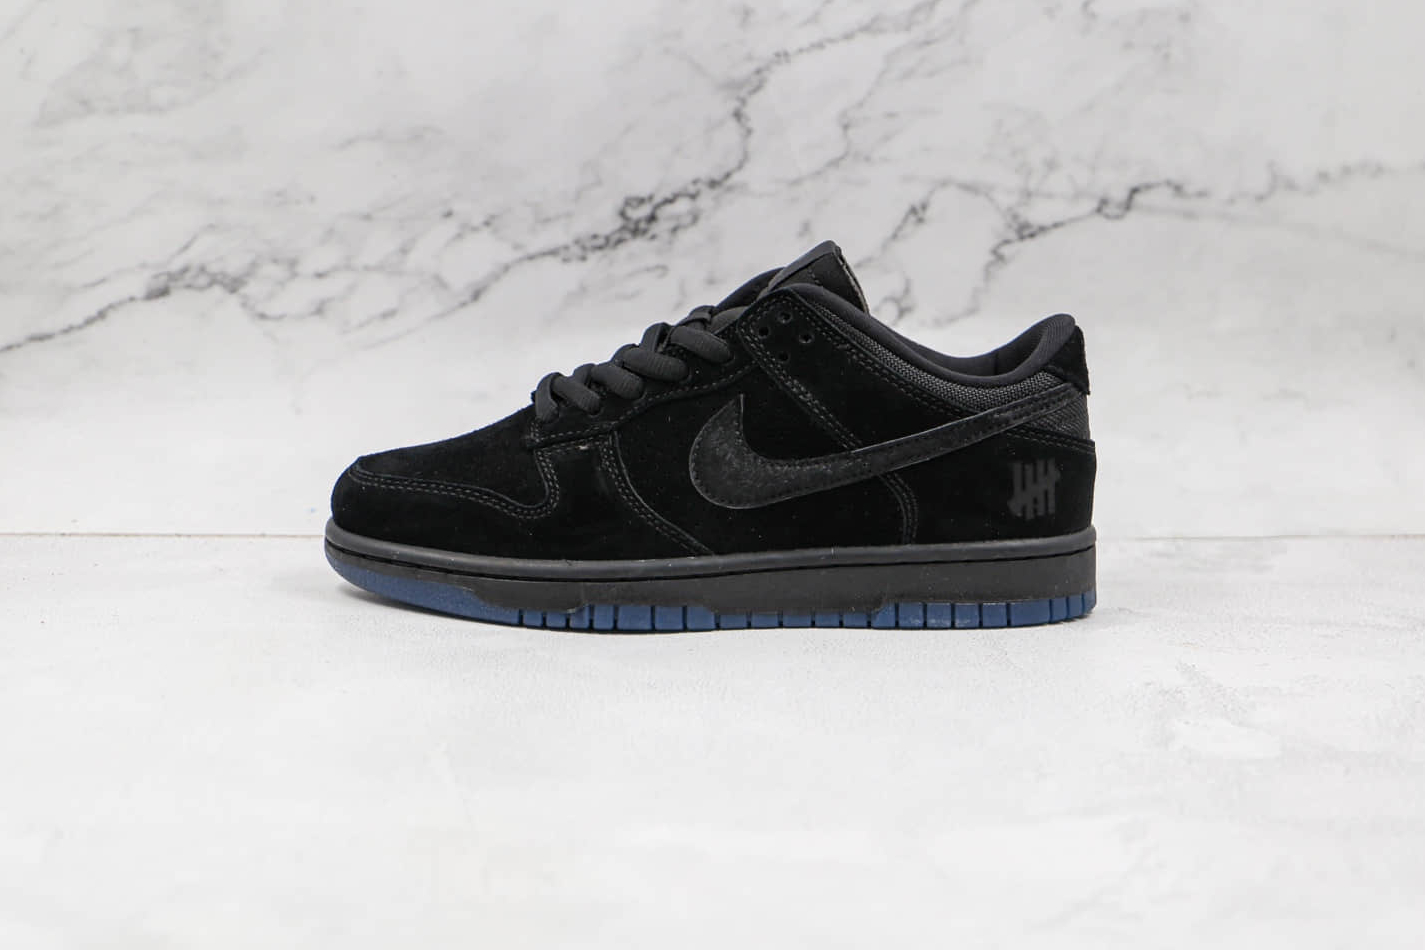 Nike Undefeated x Dunk Low 'Dunk vs AF1' DO9329-001 - Premium Collaboration Sneakers